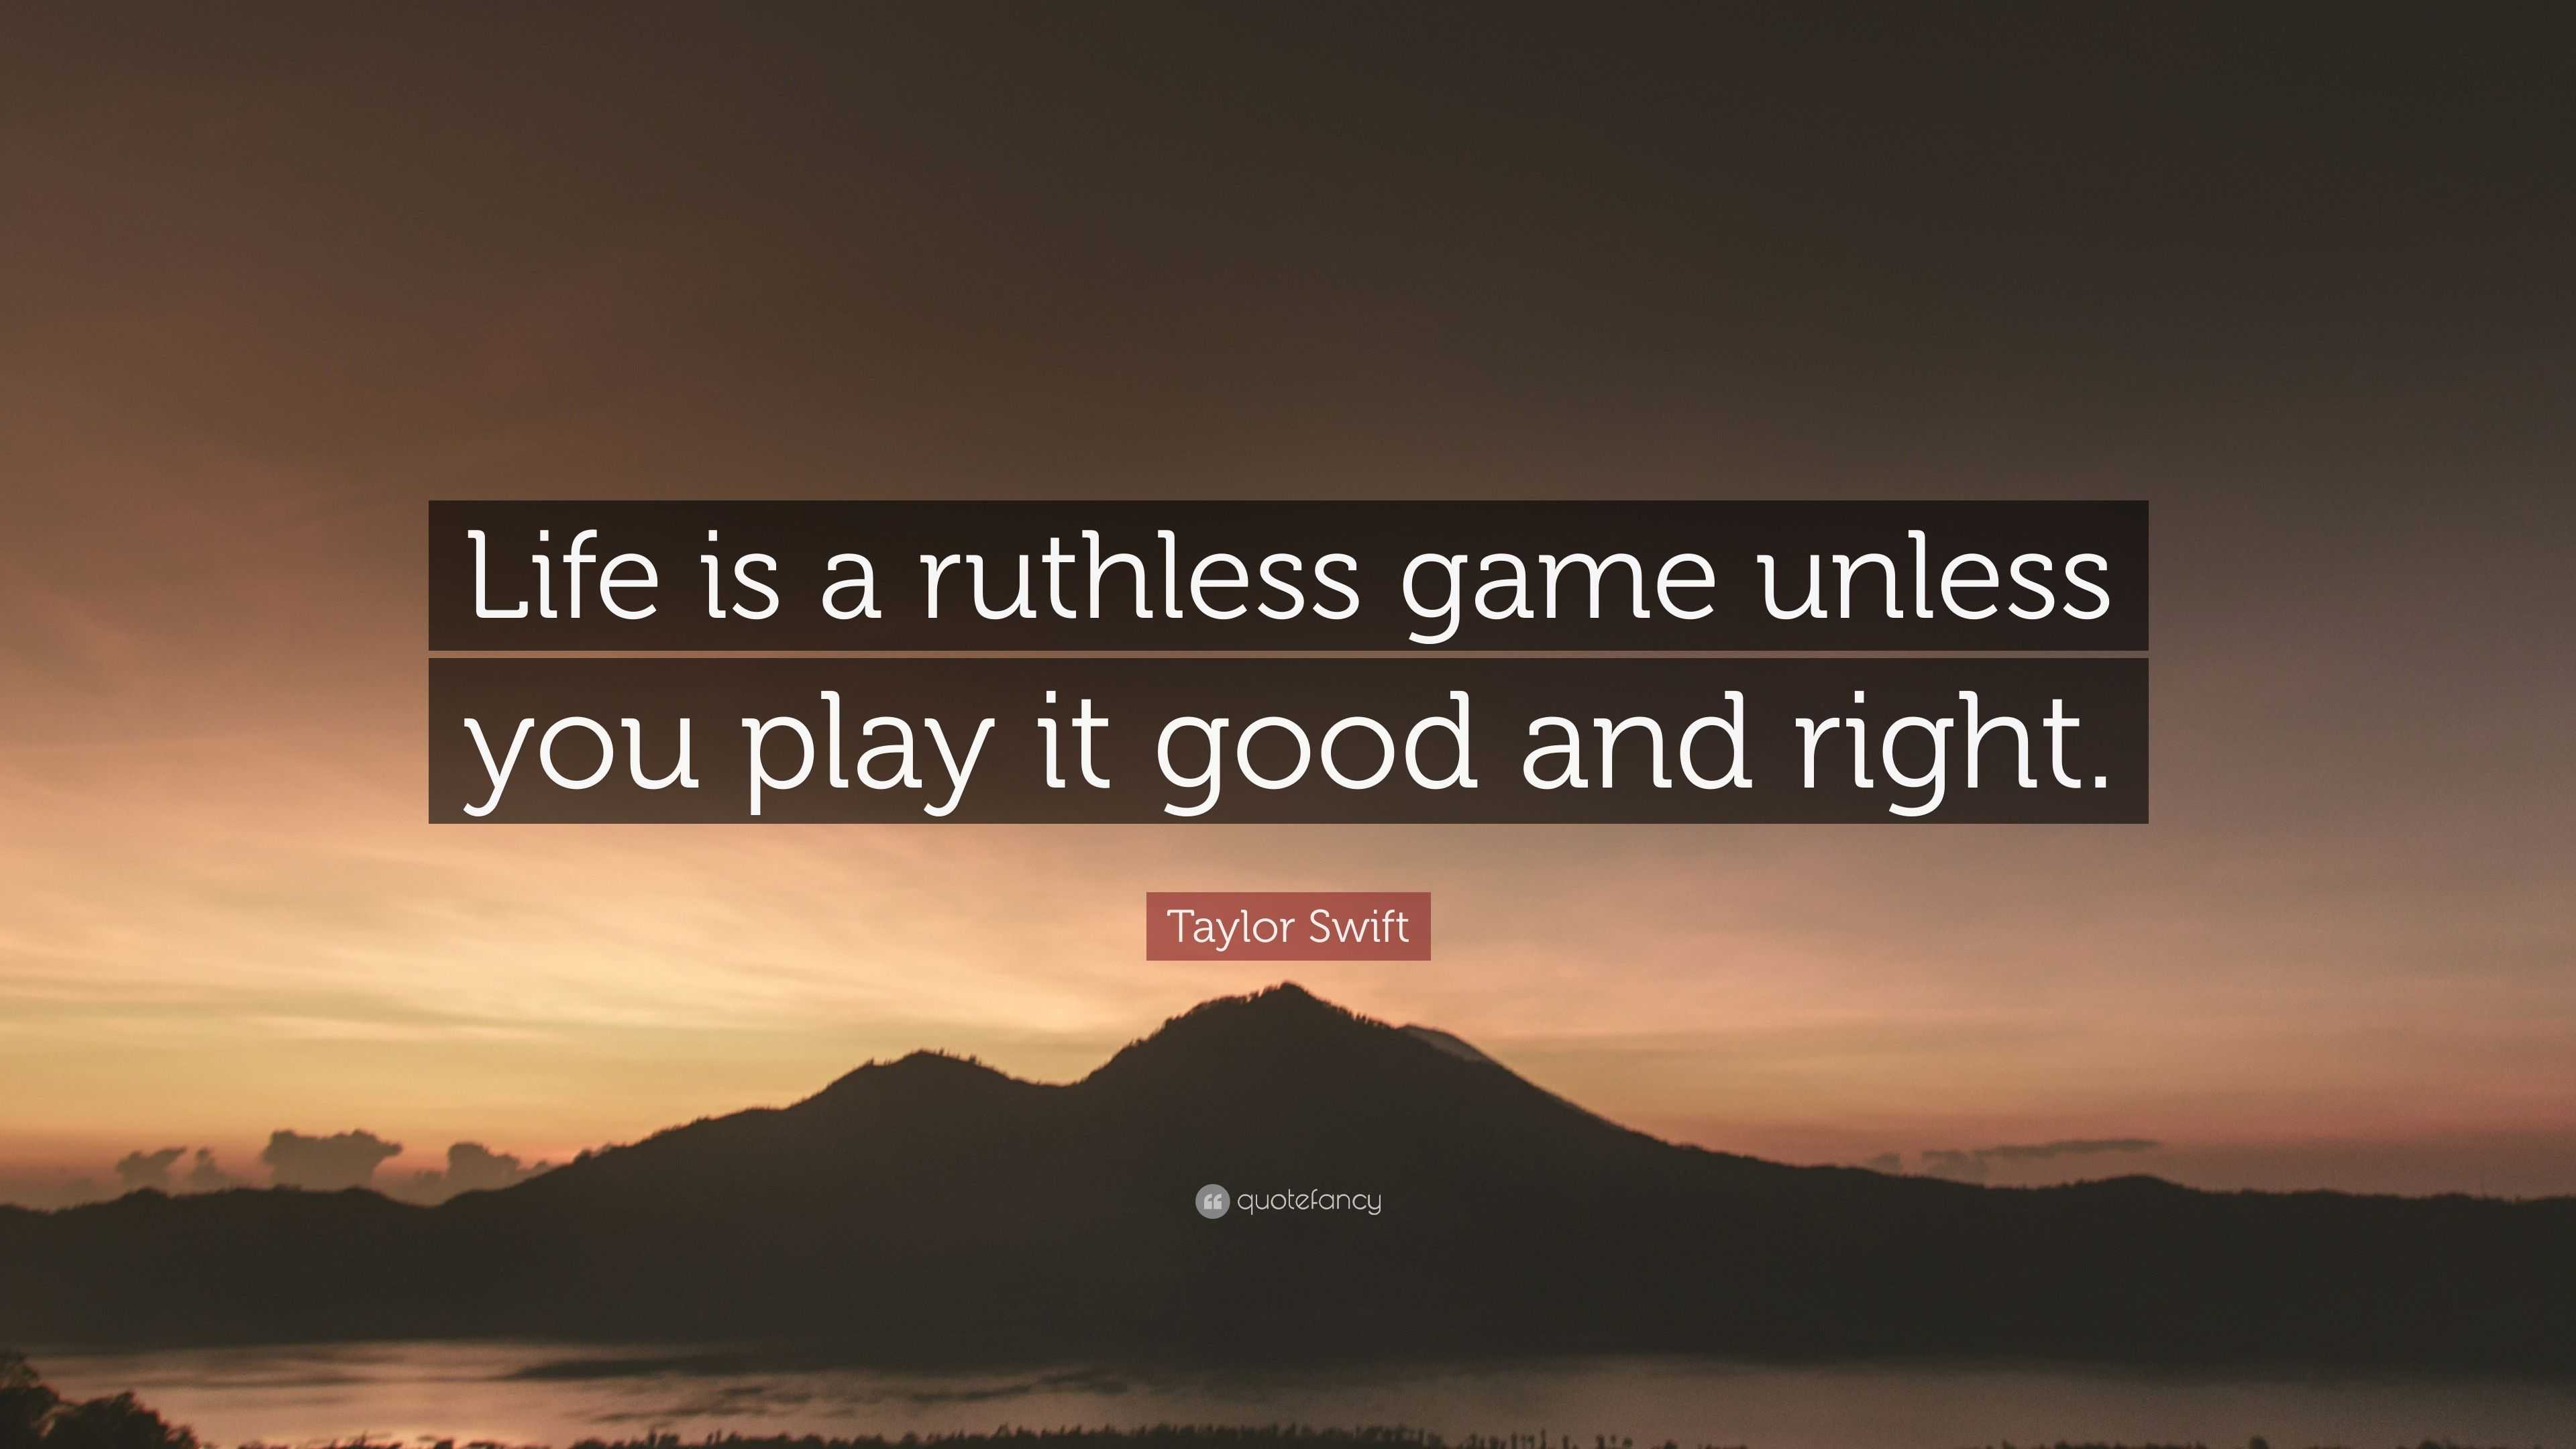 Taylor Swift Quote: “Life is a ruthless game unless you play it good and  right.”